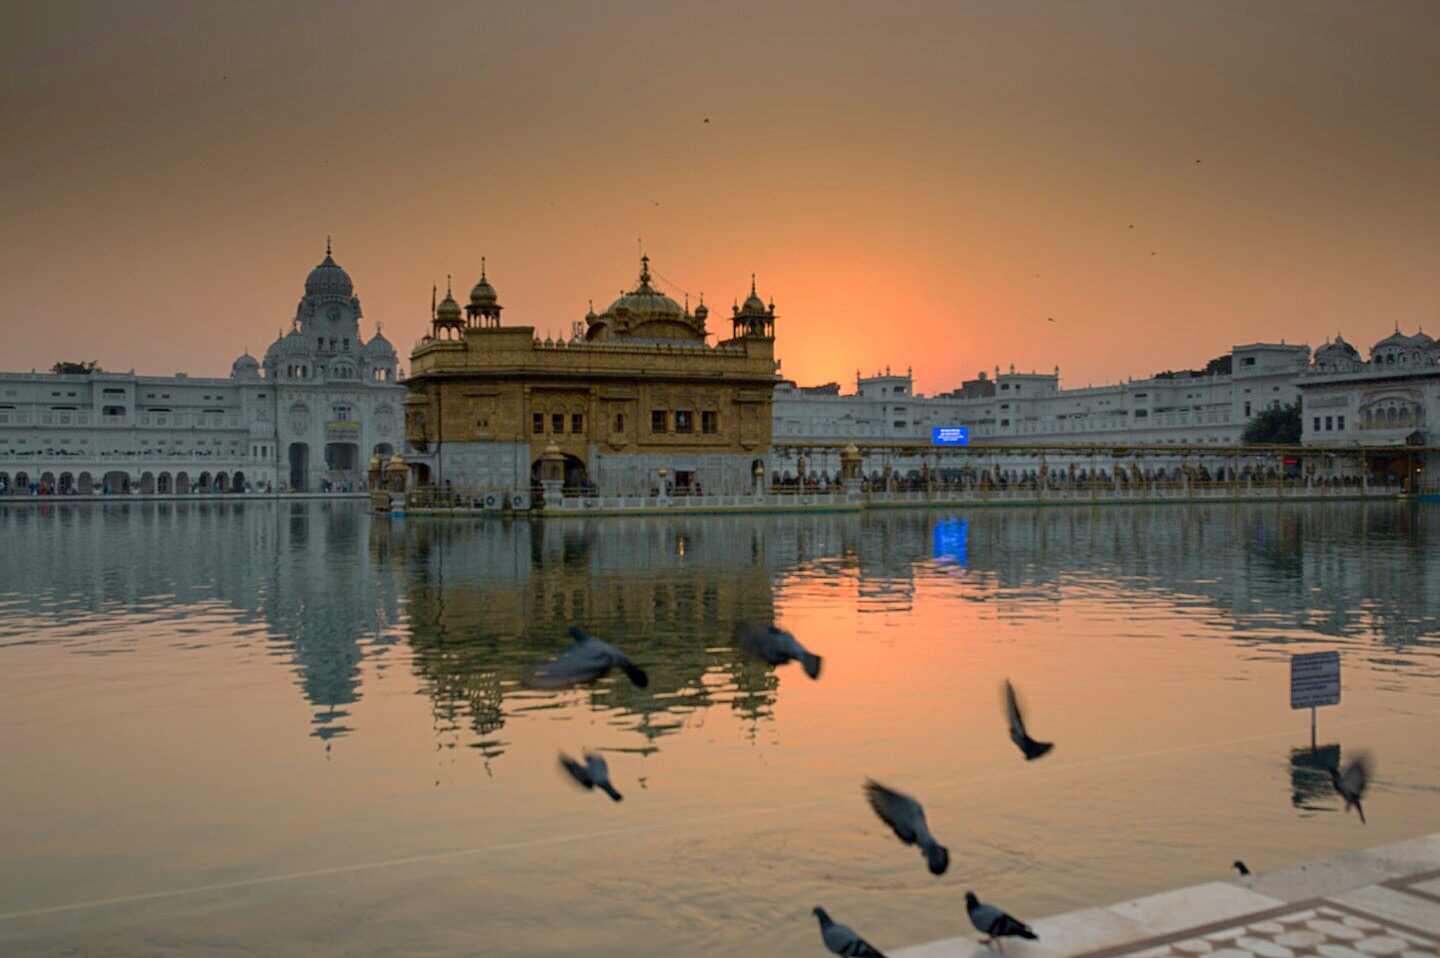 The #golden #temple in all its glory. #openroadindia